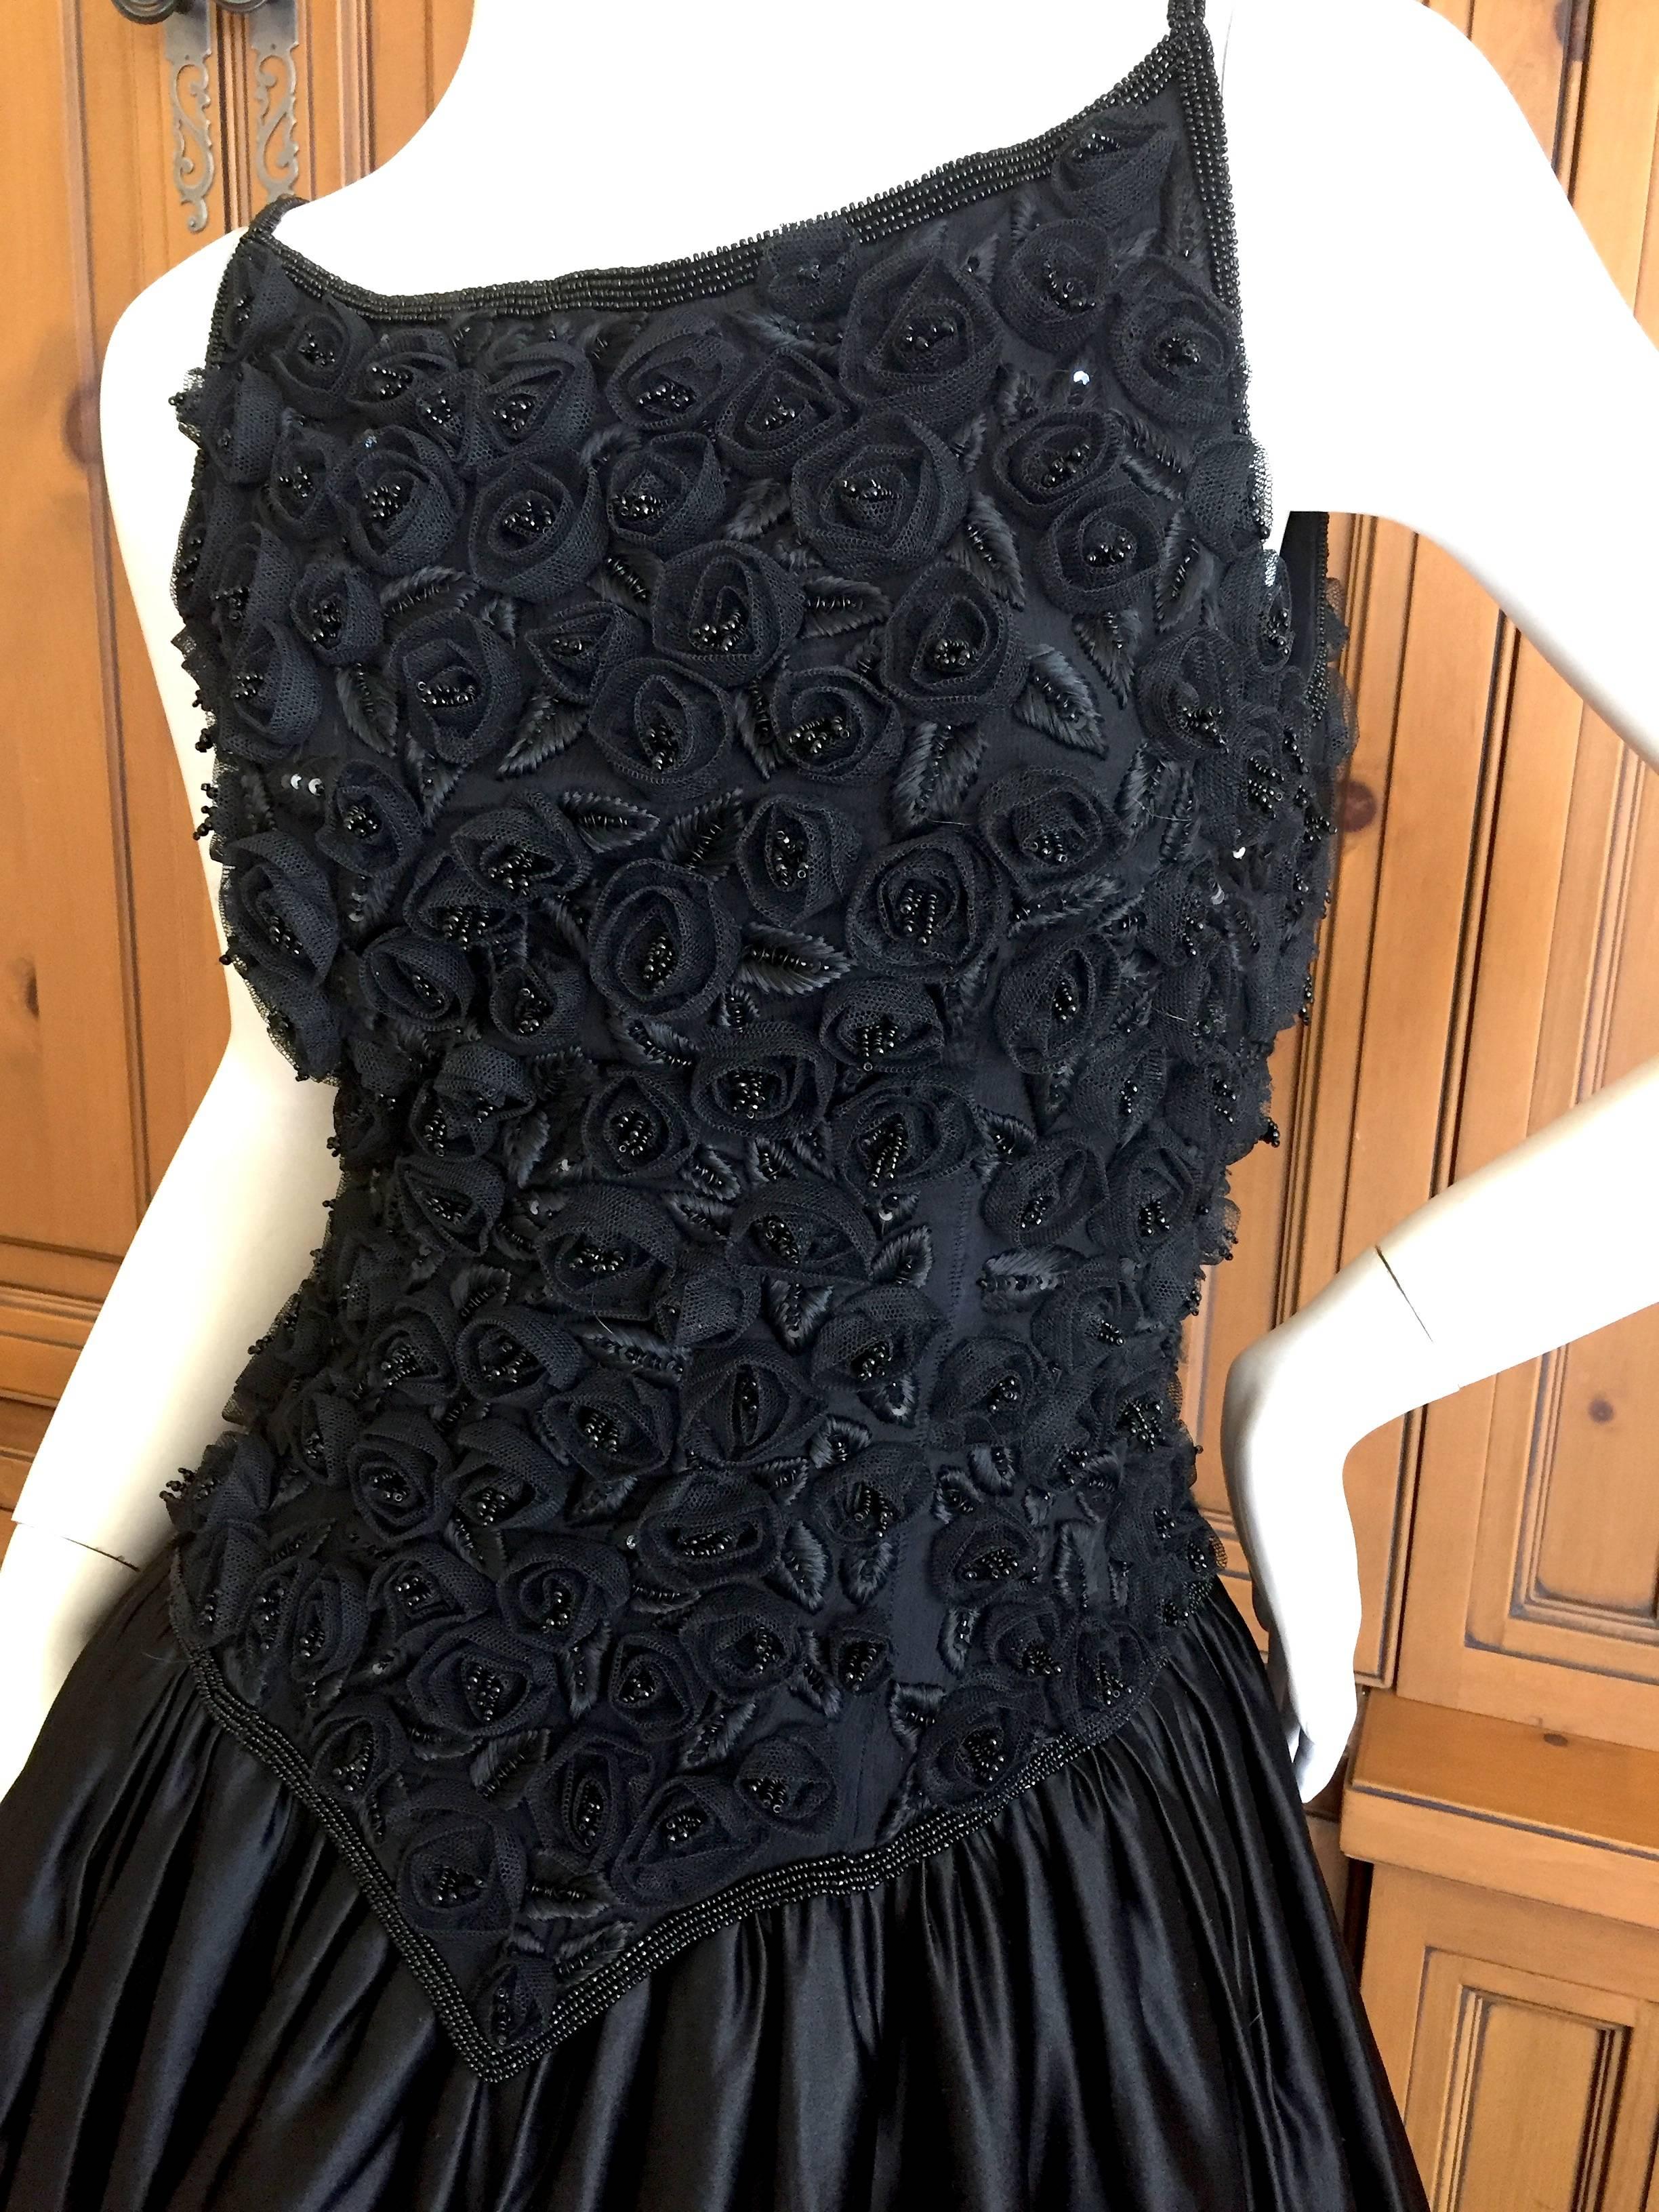 Magnificent evening dress from Yves Saint Laurent, from the 1970's.
Featuring a full skirt with four layers of tulle skirts for body, the bodice is finely embellished with hand made floral rosettes of horsehair & beads with embroidered leaves from